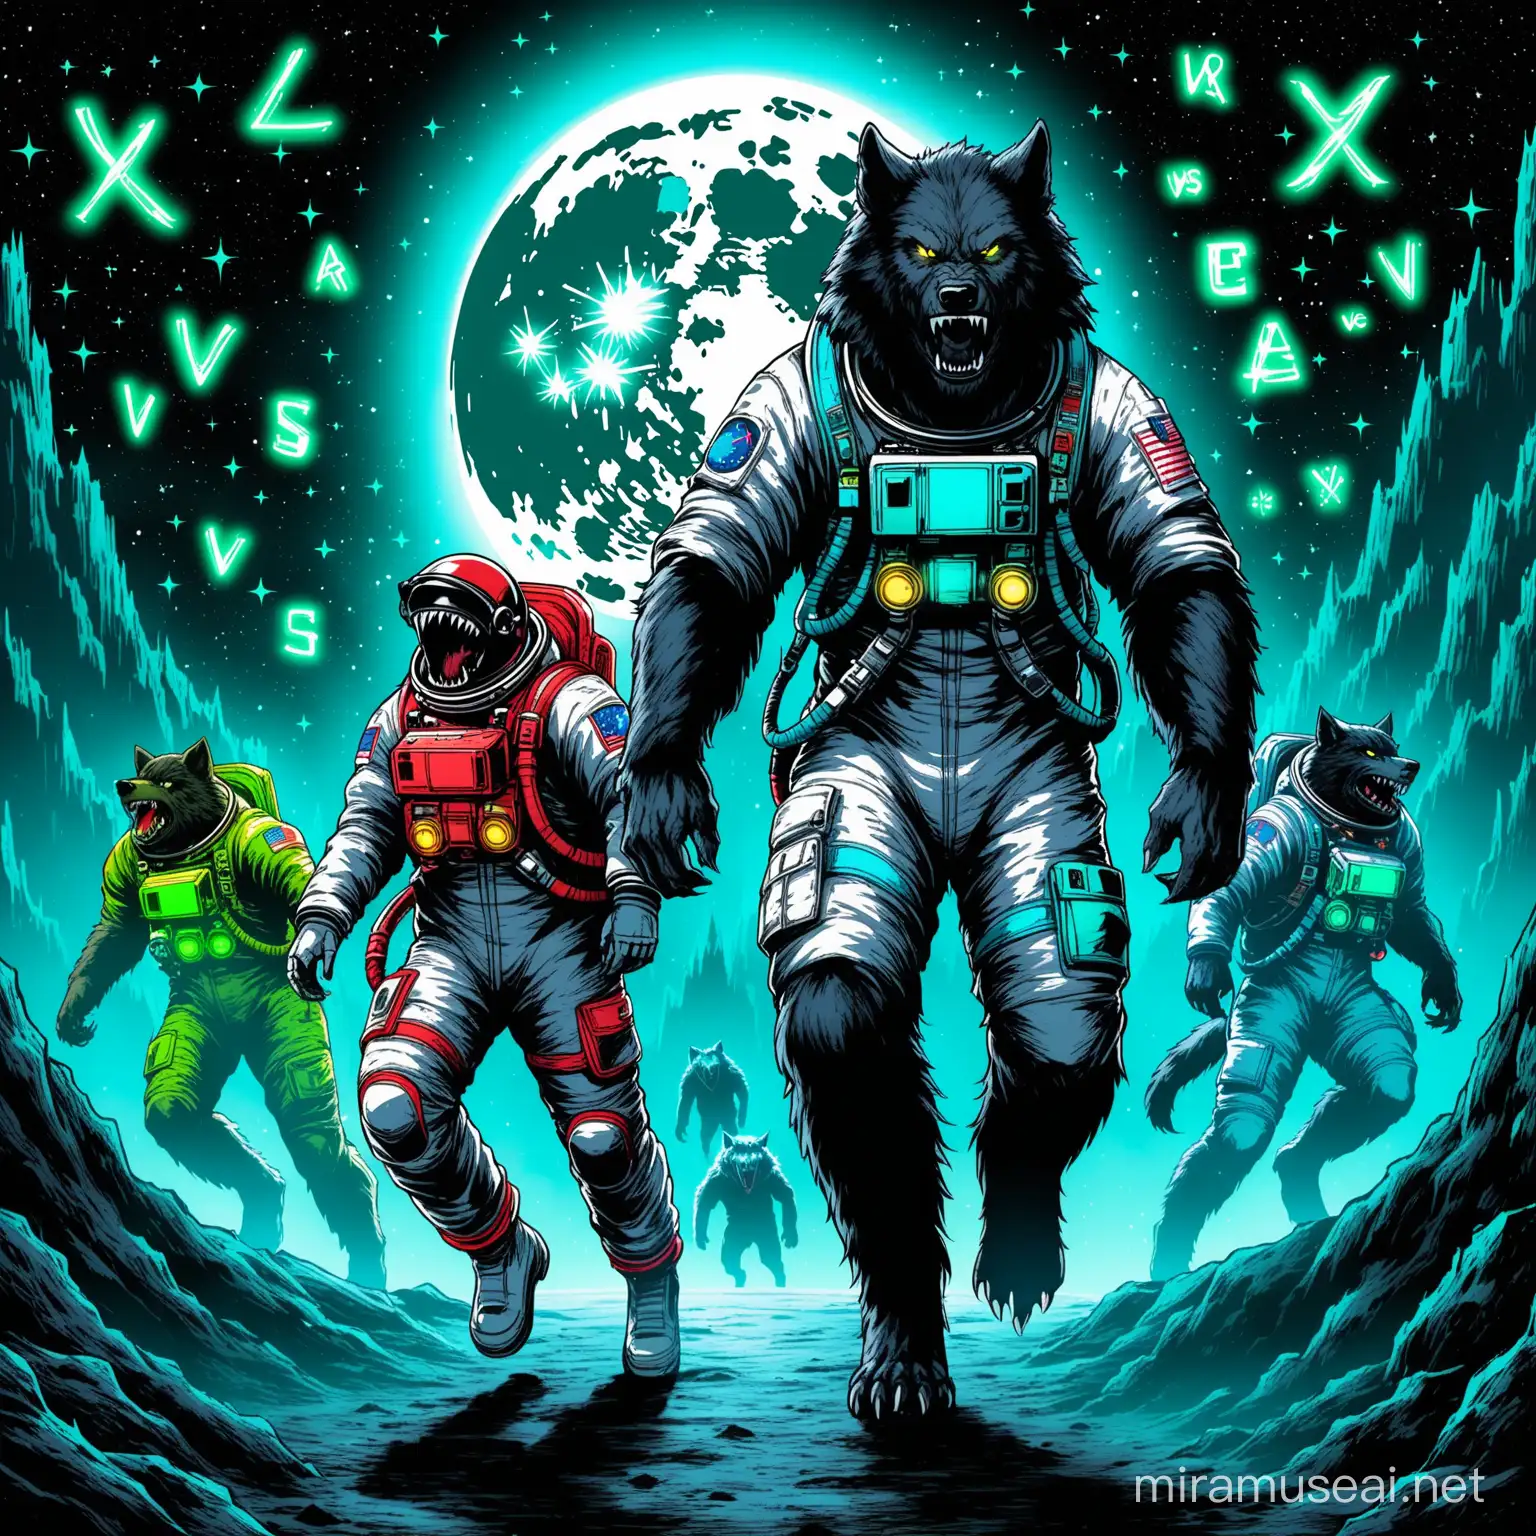 Astronaut vs Werewolf
appreance- fullbody/ astronaut with neon red/blue/white/, werewolf with neon blue/green/black / runes/scary
background-noir on moon/grey/silver moon with gold green earthin background/stars/